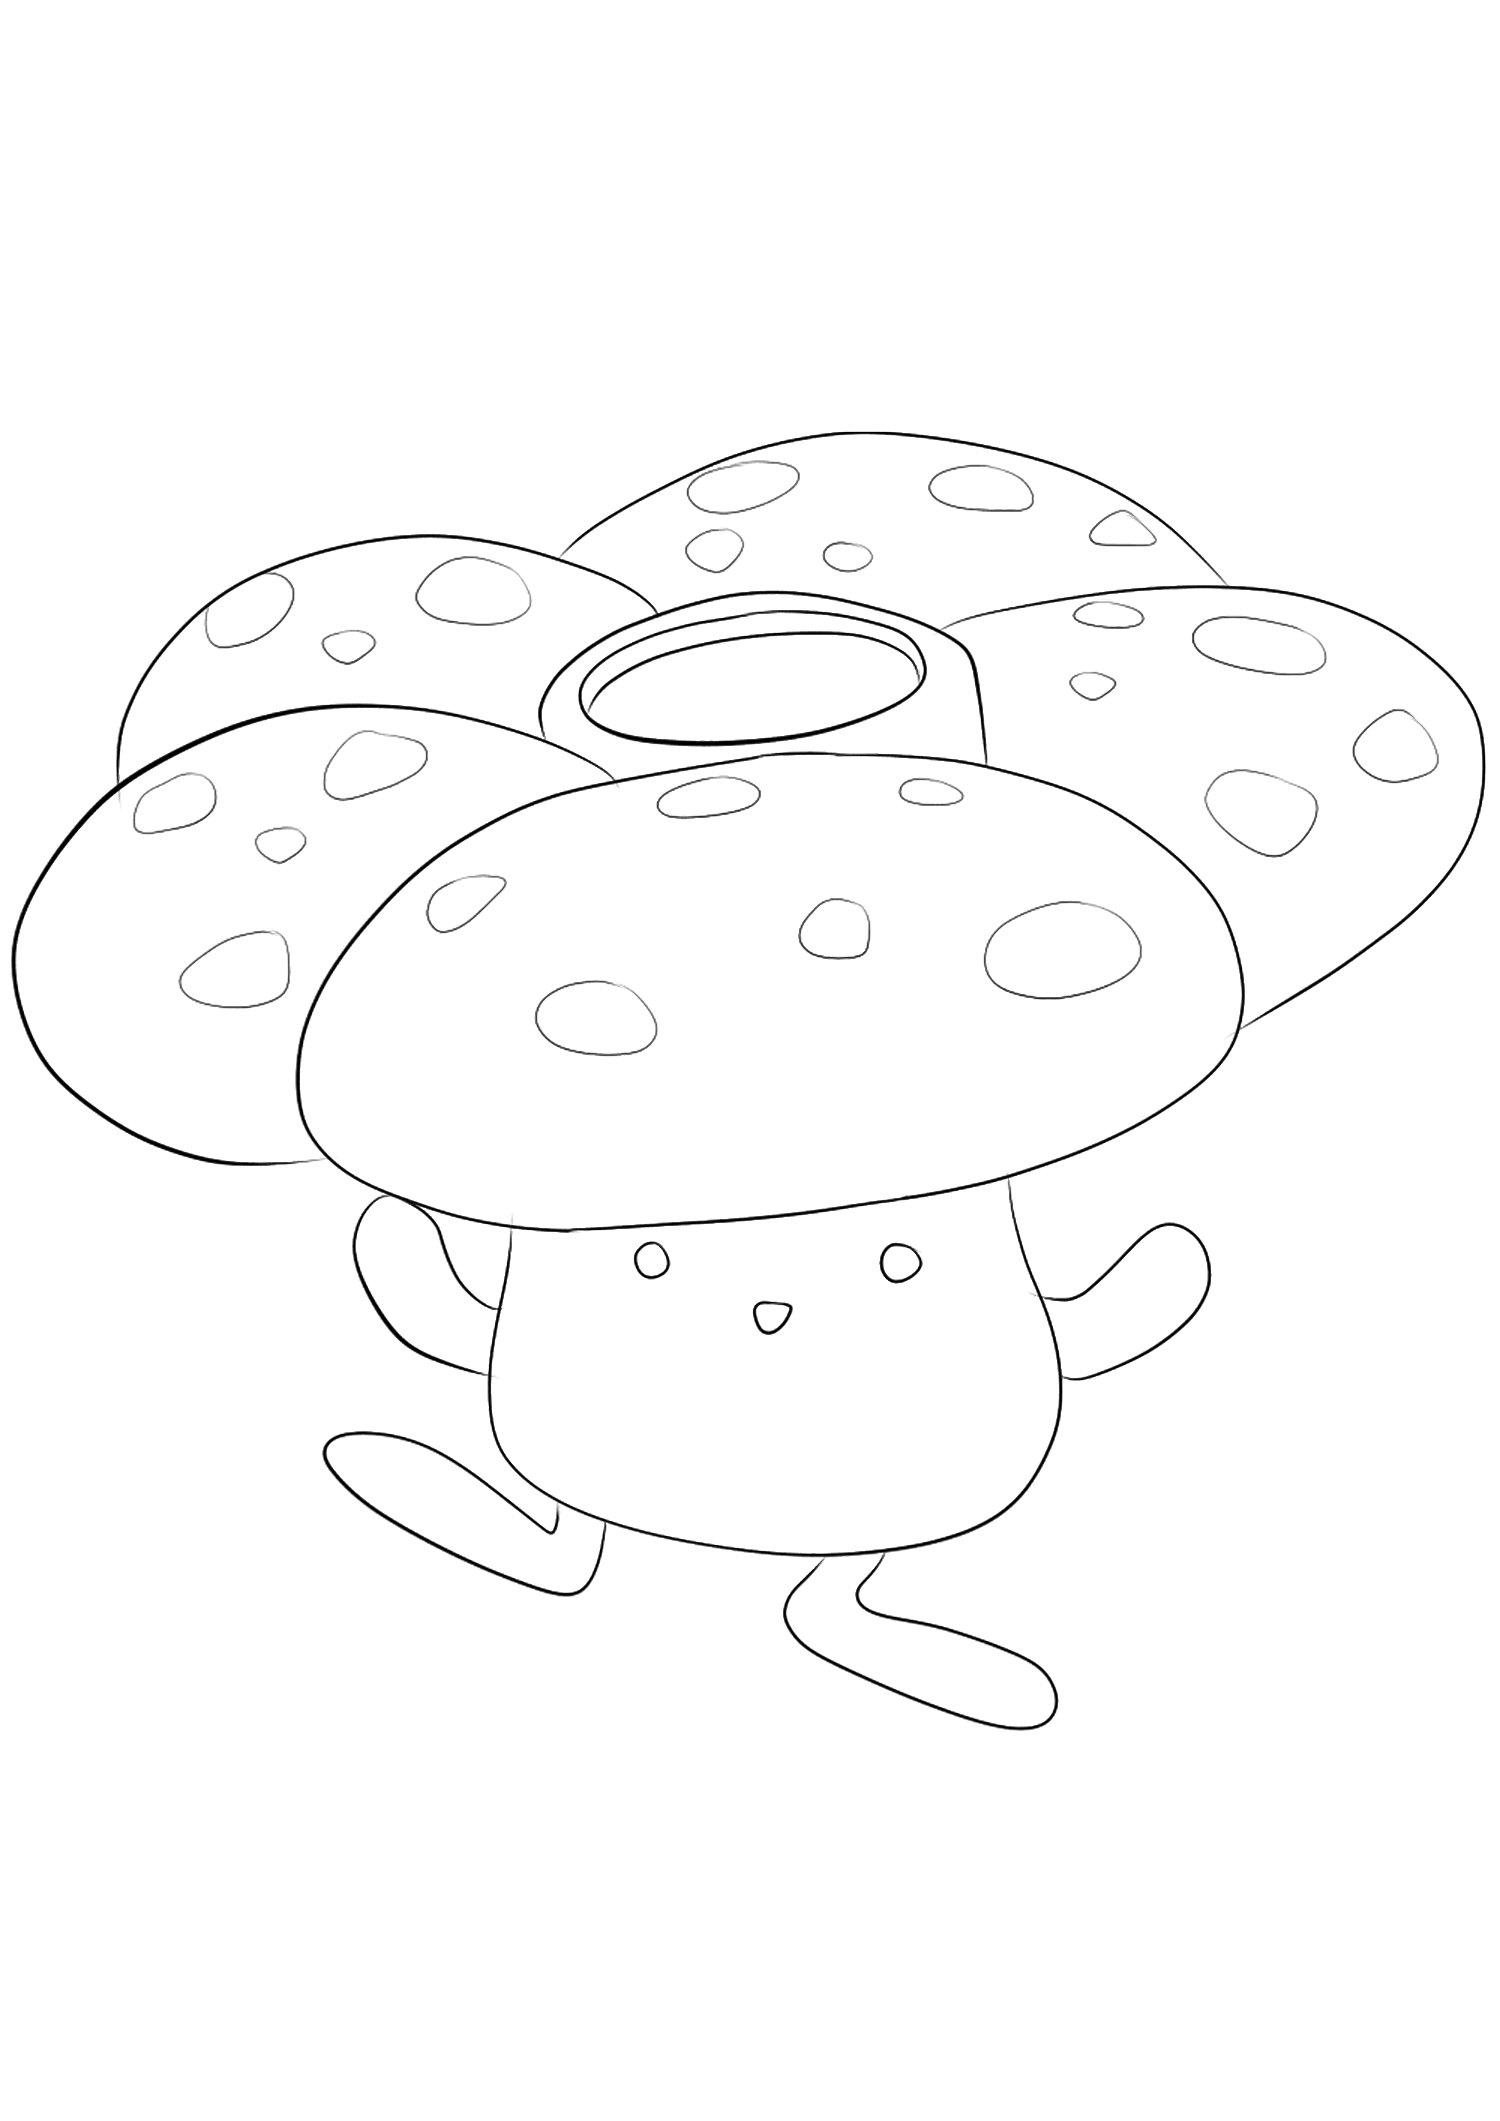 Vileplume (No.45). Vileplume Coloring page, Generation I Pokemon of type Grass and PoisonOriginal image credit: Pokemon linearts by Lilly Gerbil'font-size:smaller;color:gray'>Permission: All rights reserved © Pokemon company and Ken Sugimori.